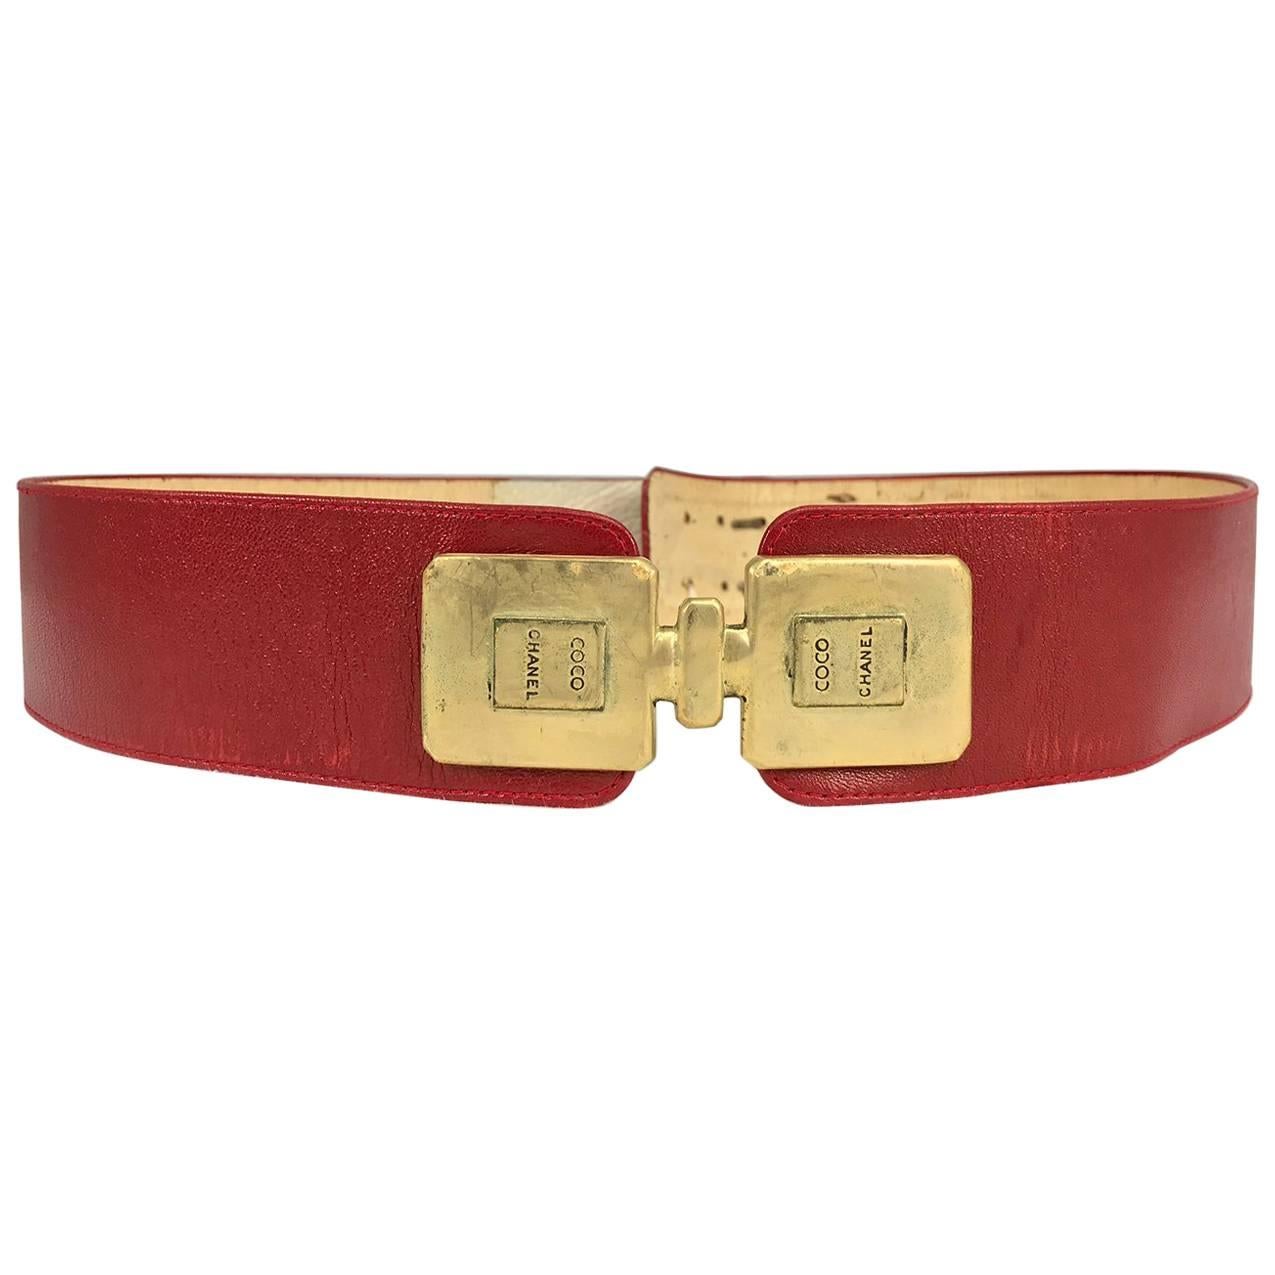 Chanel Coco gold bottles with red leather belt vintage 1980s